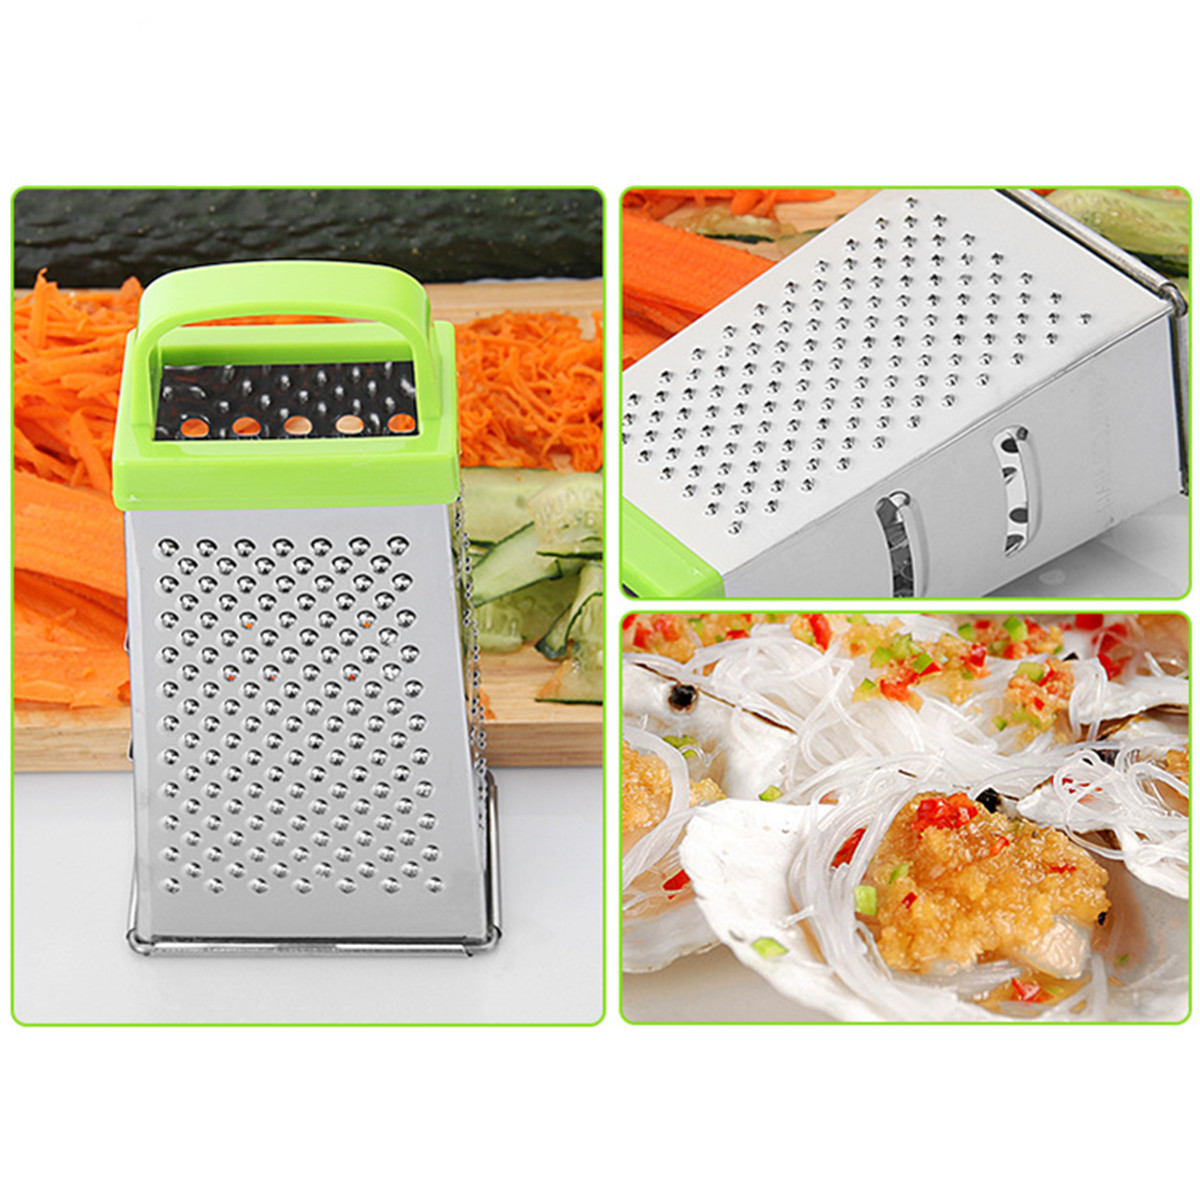 Grater-Box-Stainless-Steel-4-Sided-Multi-Funtion-Cheese-Vegetable-With-Container-Lunch-Box-1304772-3